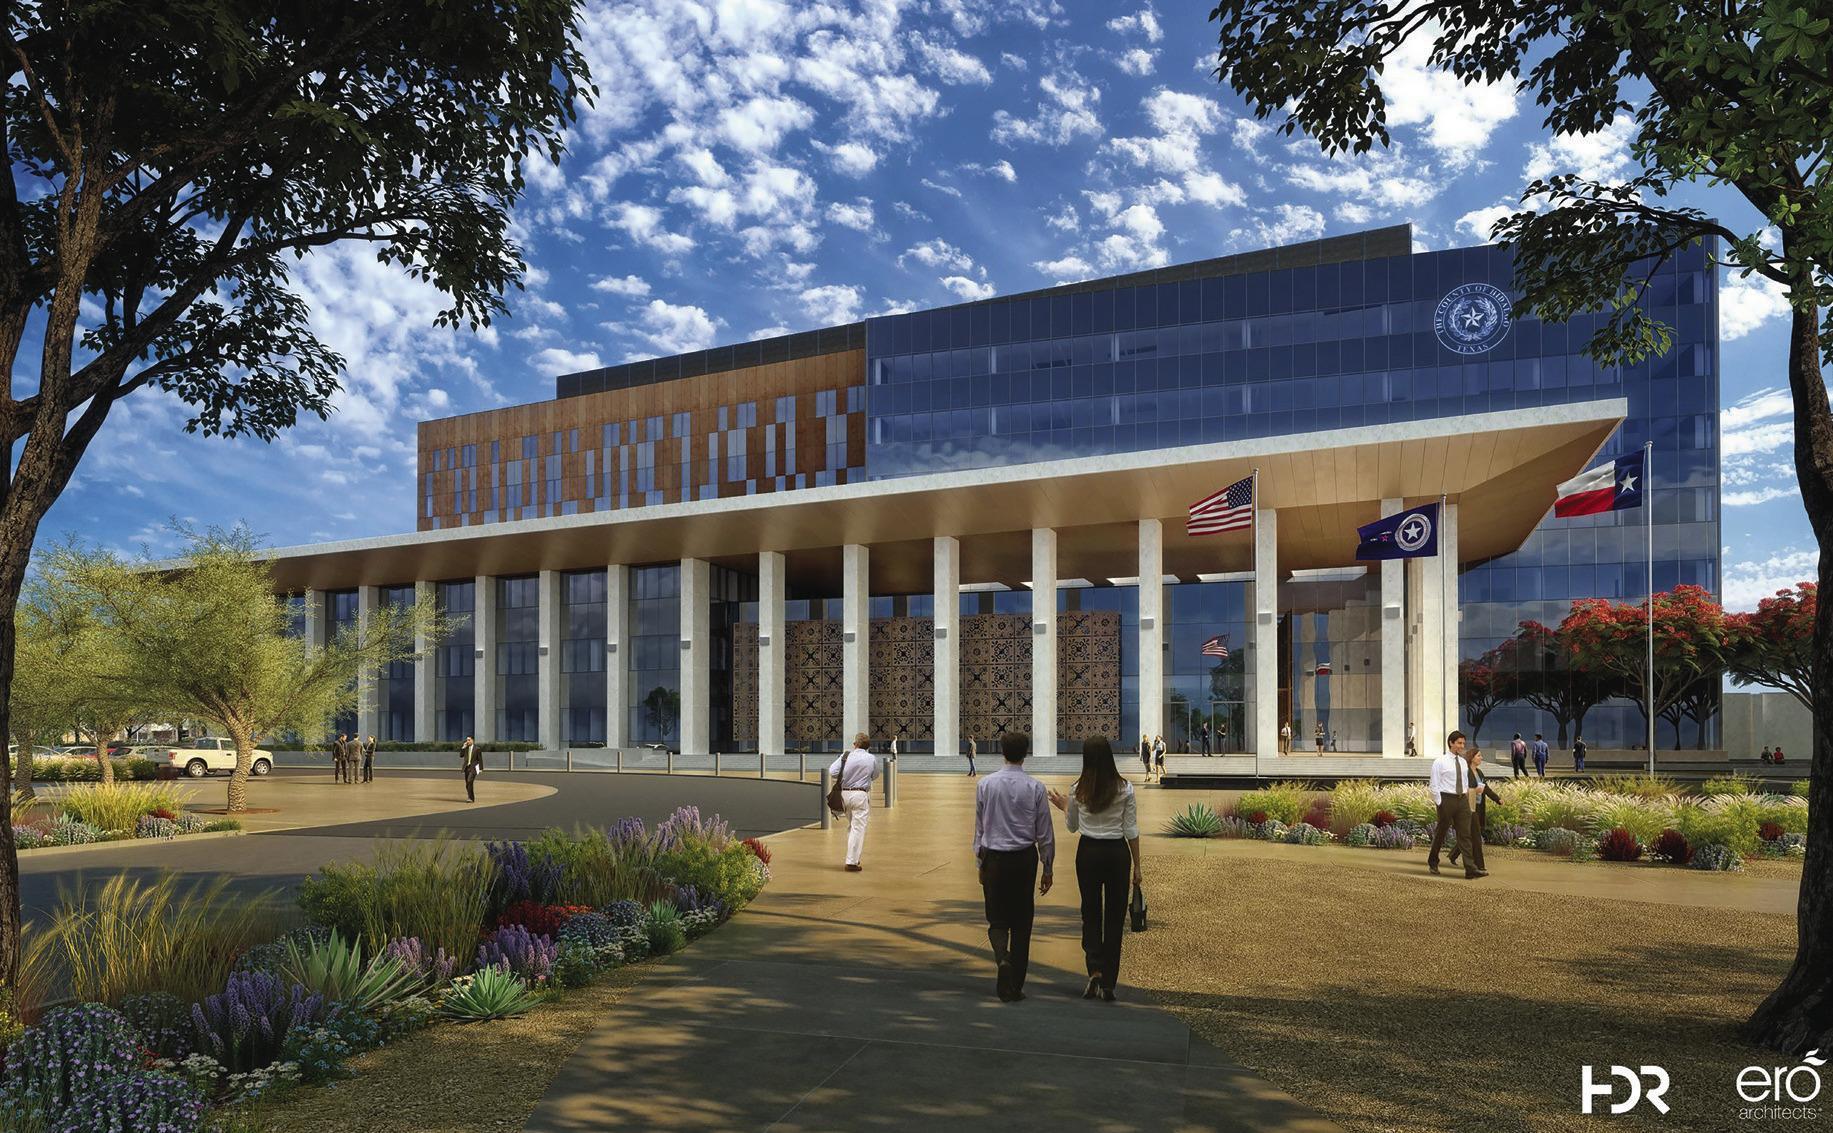 A rendering of the new Hidalgo County courthouse. Graphic Source: Hidalgo County